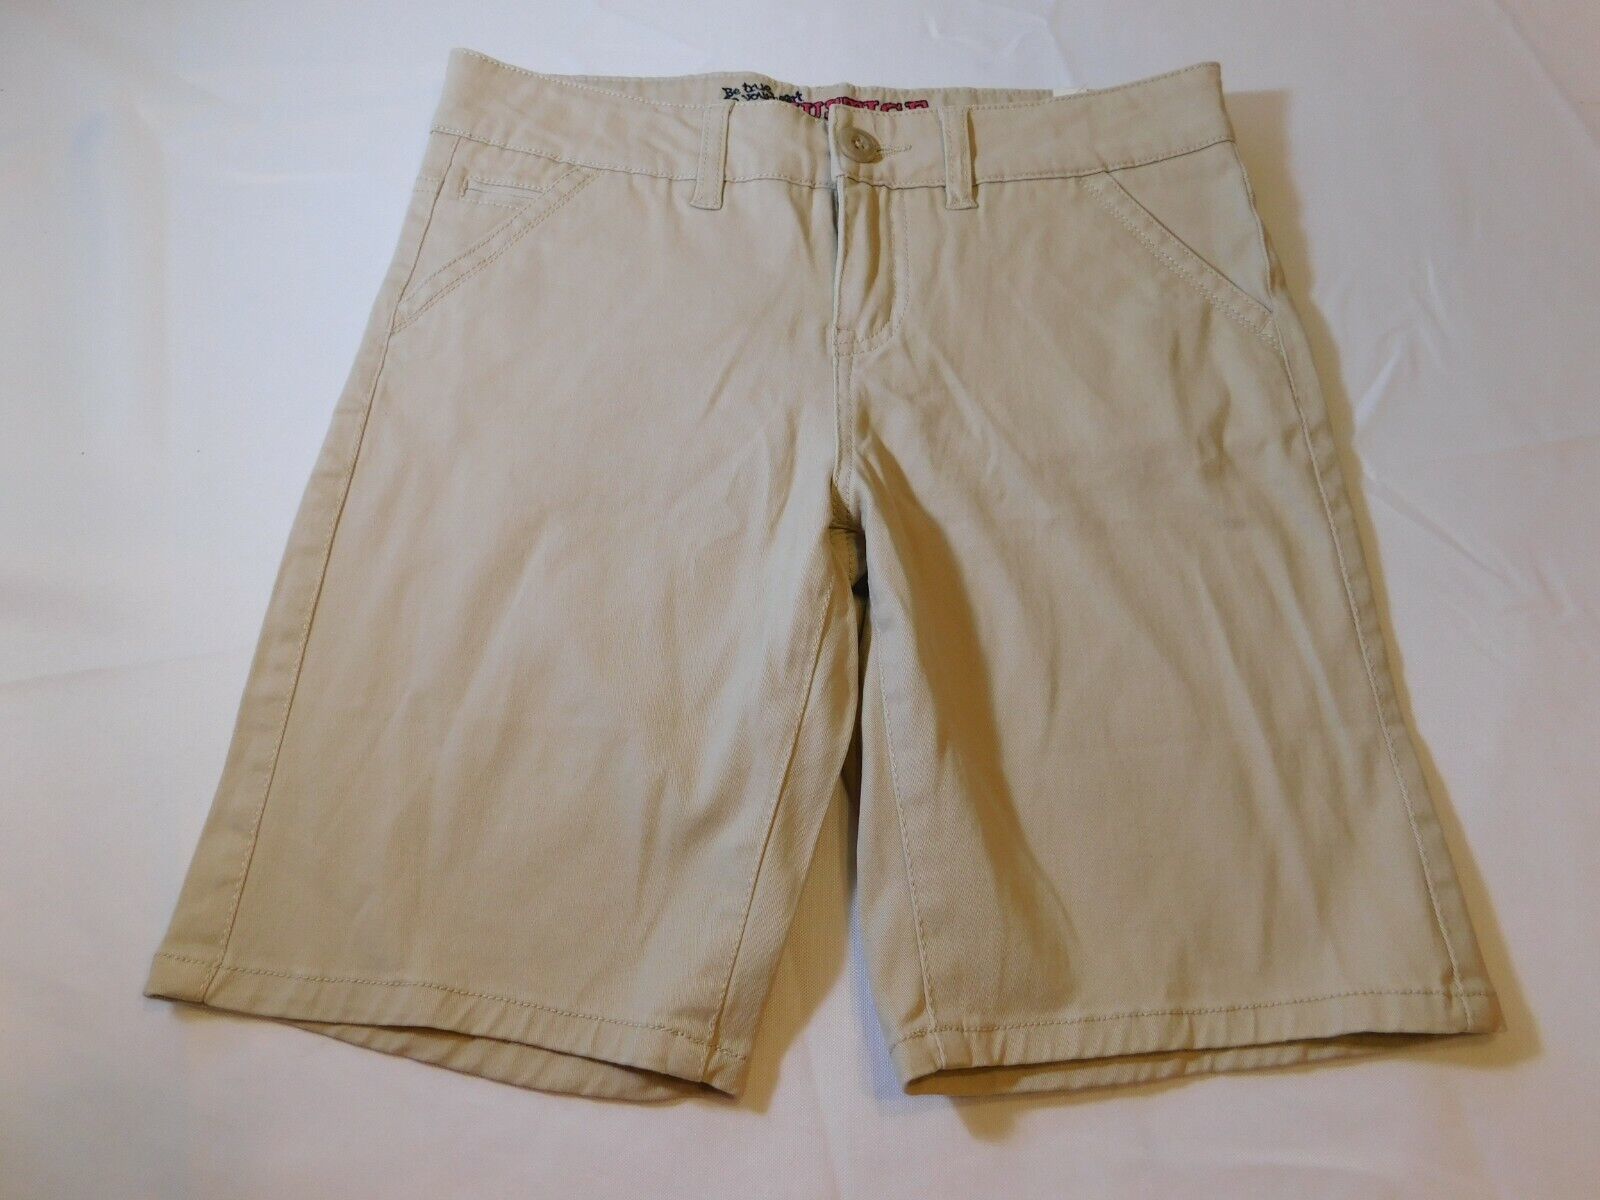 Justice Girl's Youth Size 10 1/2 Shorts Khaki Tan 636 8.5" inseam School NWT - $20.58